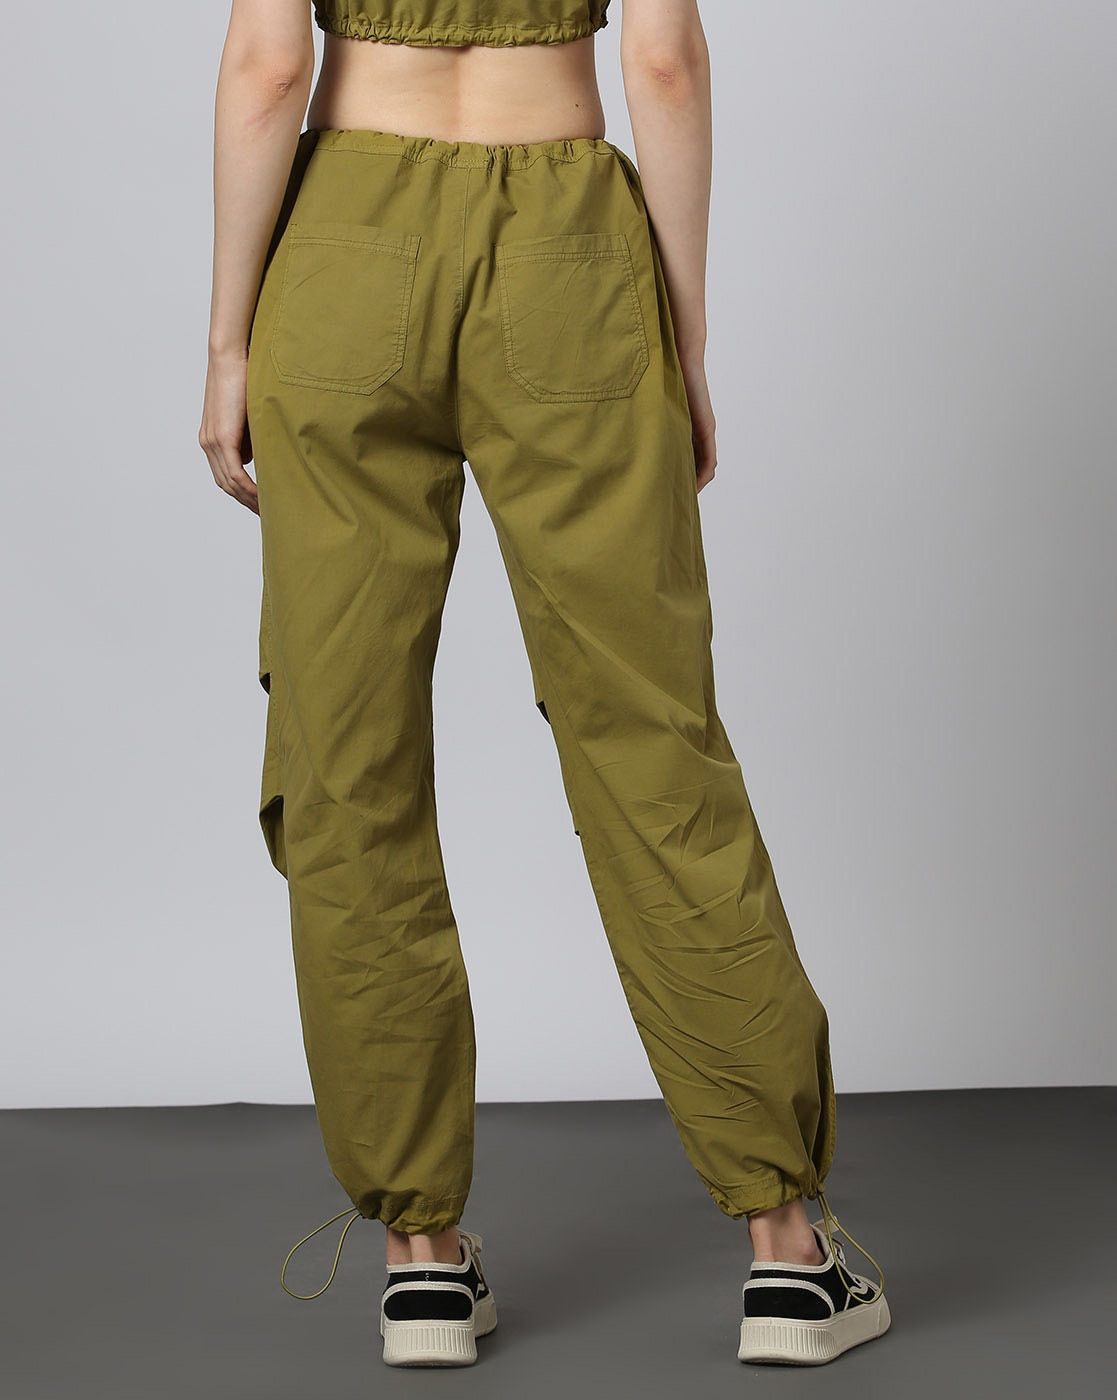 Buy Green Trousers & Pants for Women by Outryt Online